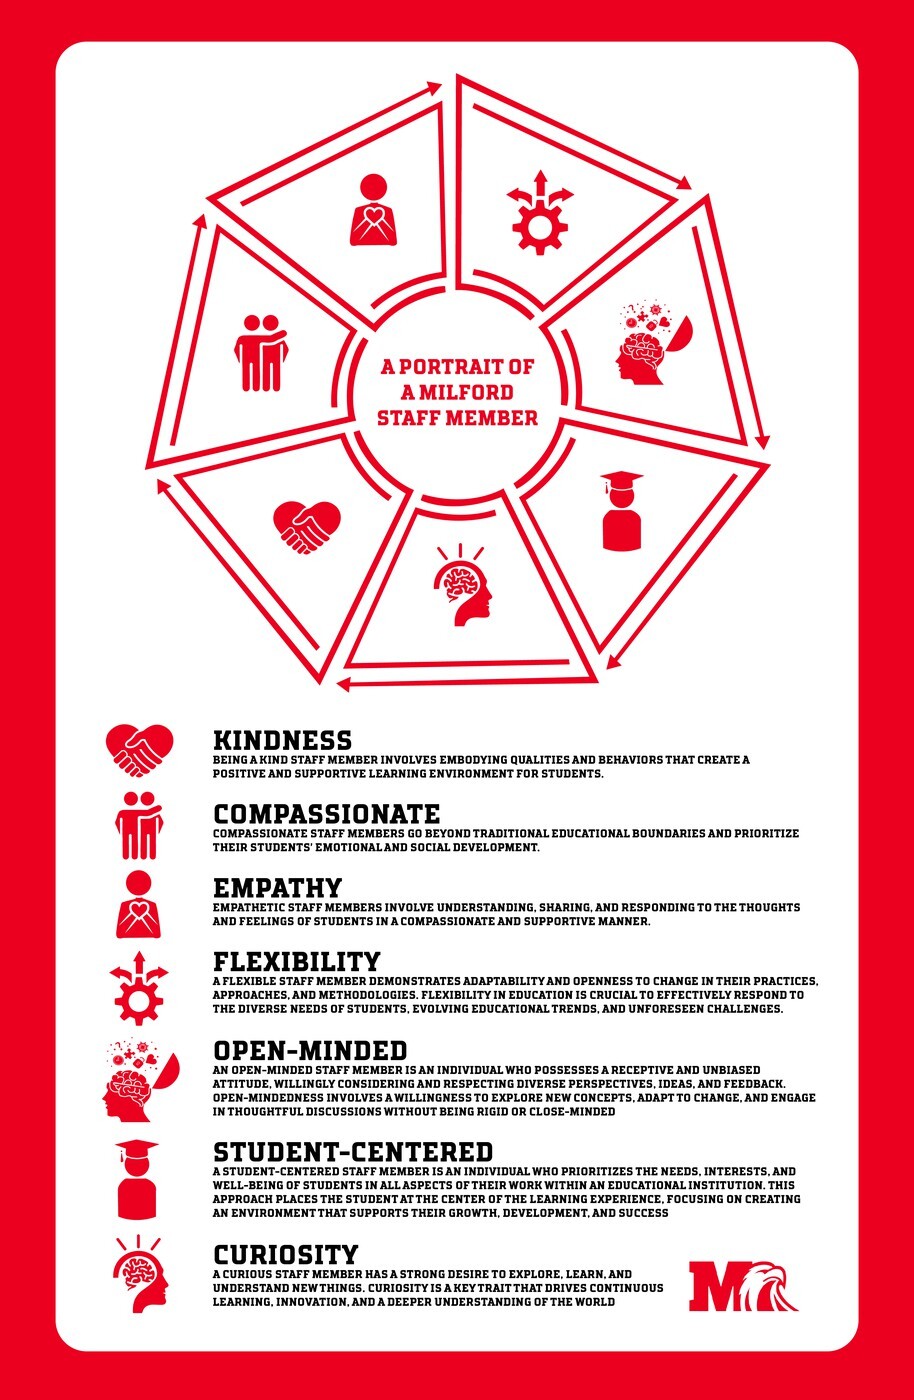 Portrait of a Milford Staff Member Infographic